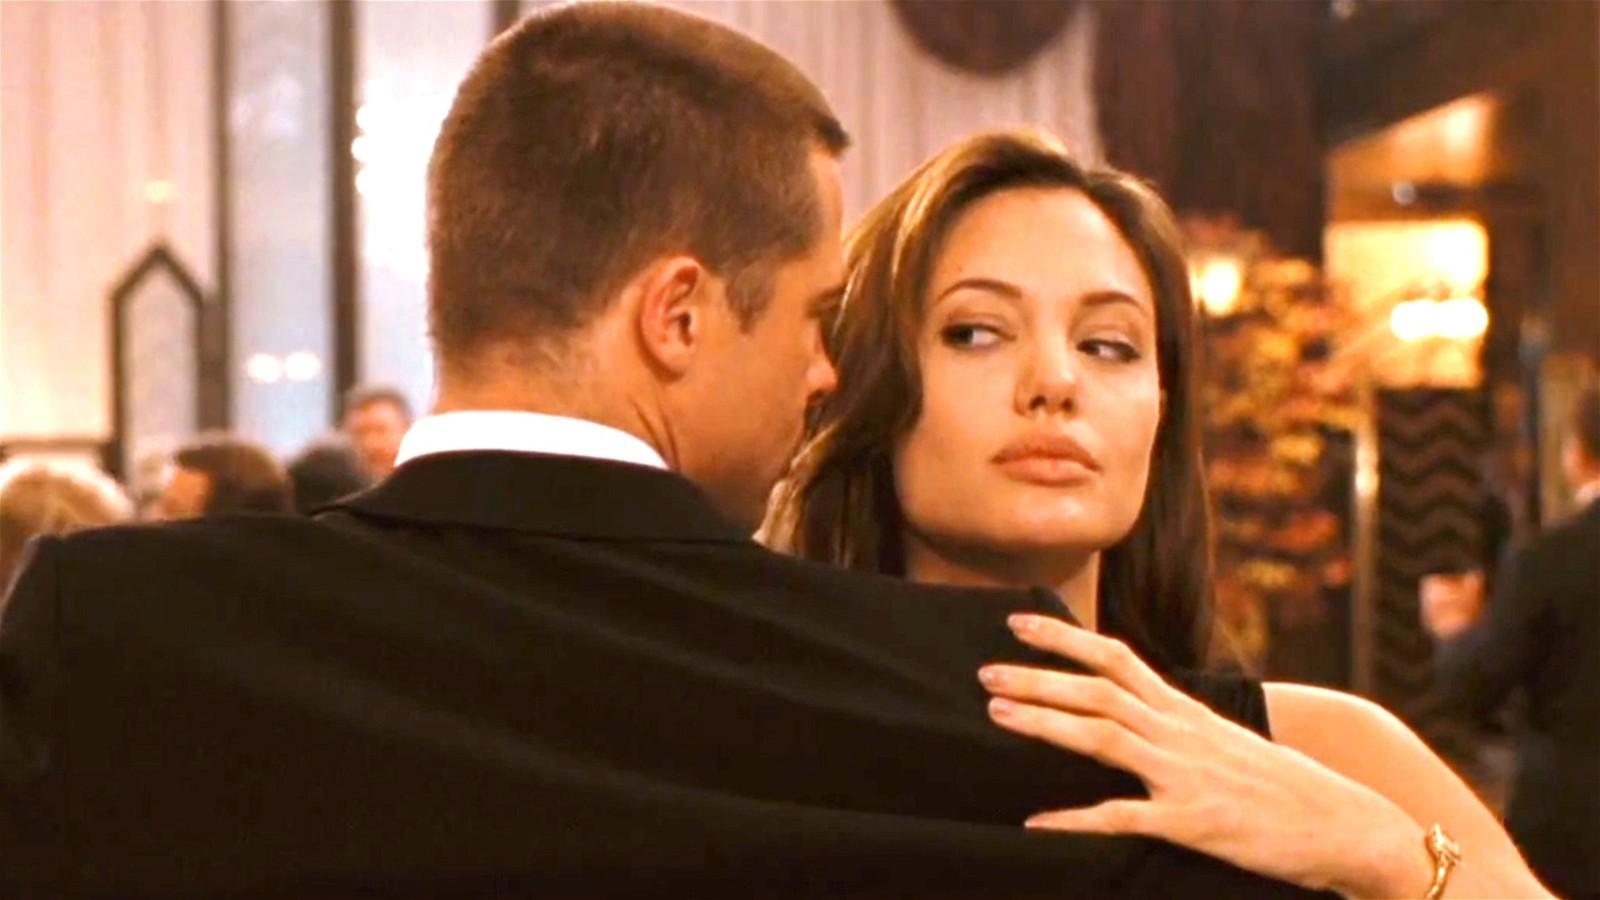 Brad Pitt and Angelina Jolie in Mr. and Mrs. Smith